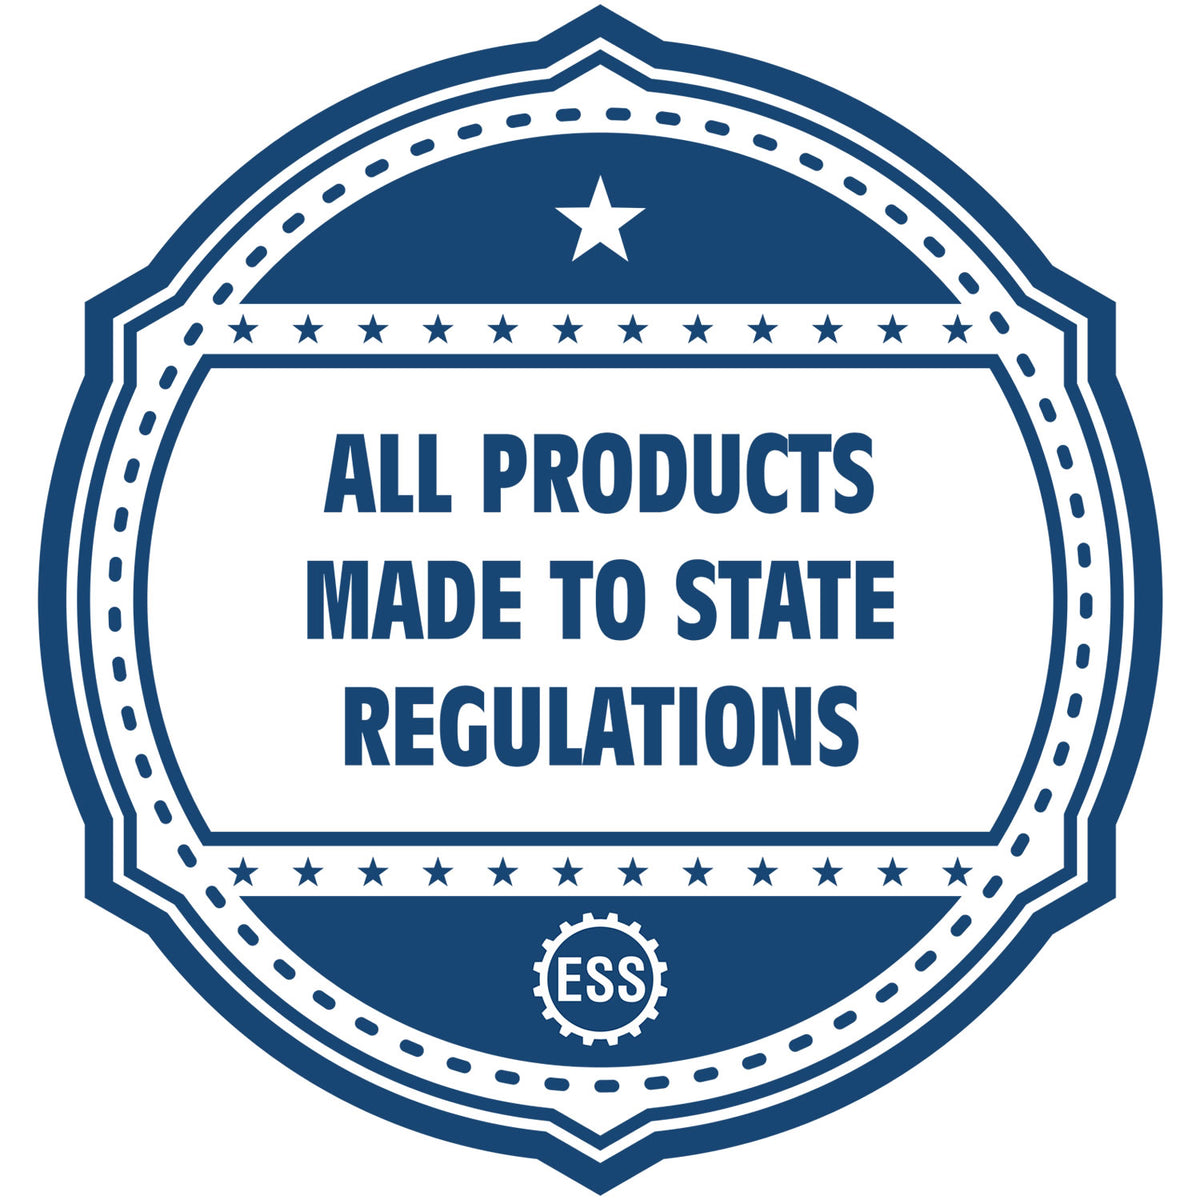 An icon or badge element for the Slim Pre-Inked Michigan Land Surveyor Seal Stamp showing that this product is made in compliance with state regulations.